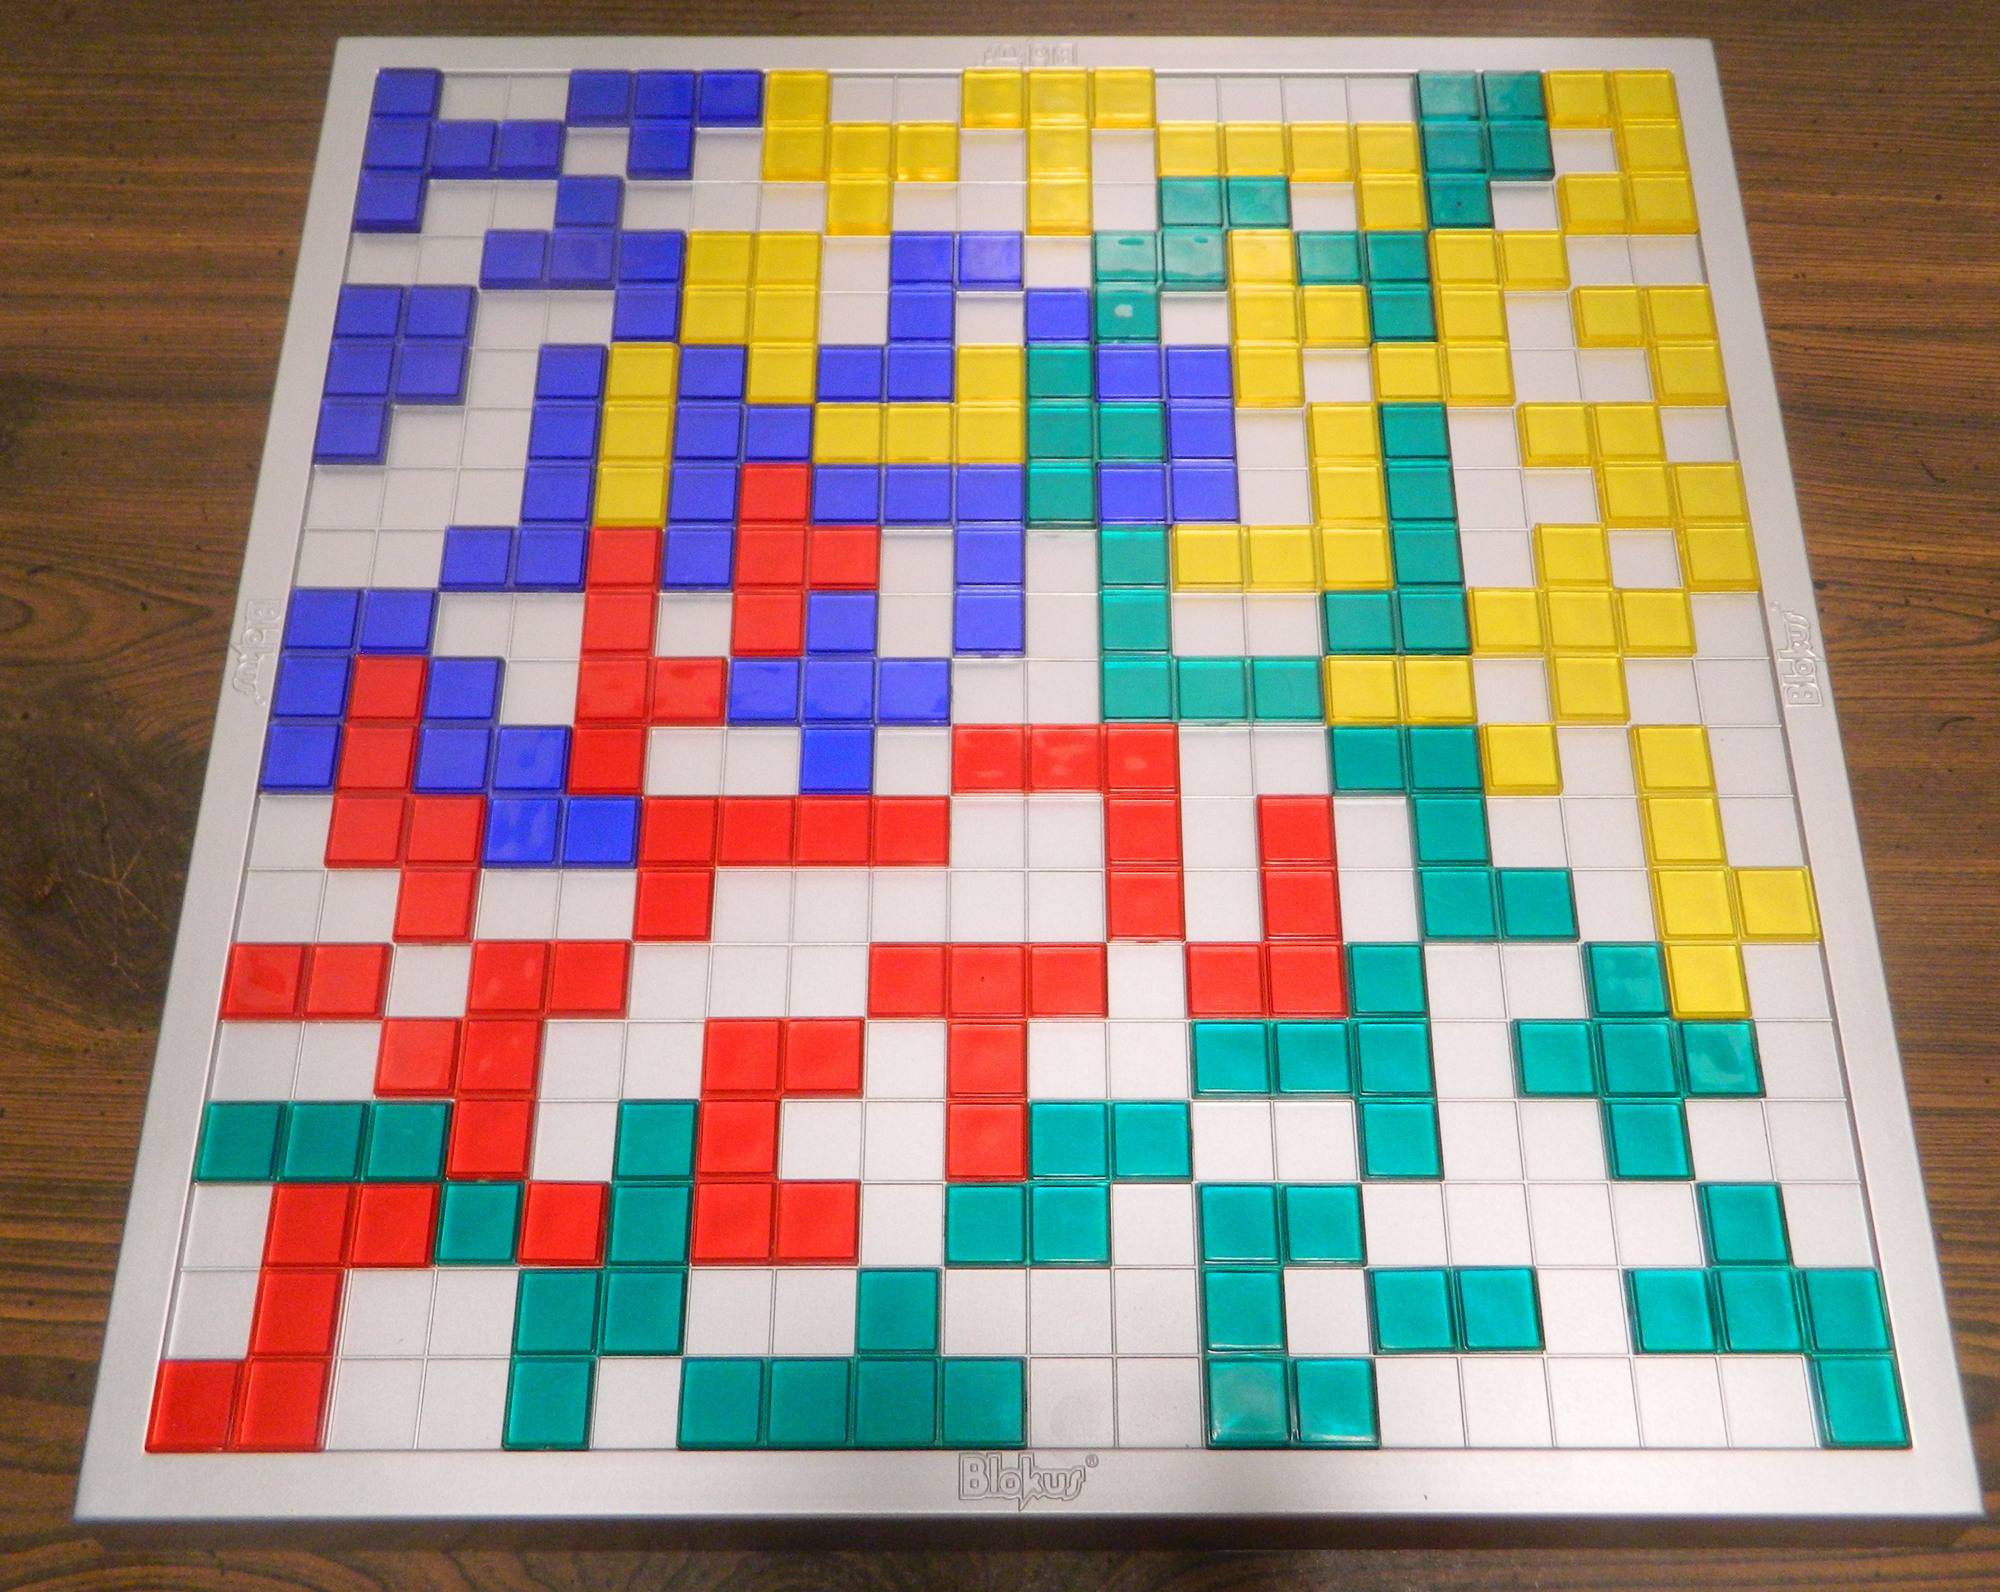 Blokus, Blokus is a game that doesn't need more than 1 page…